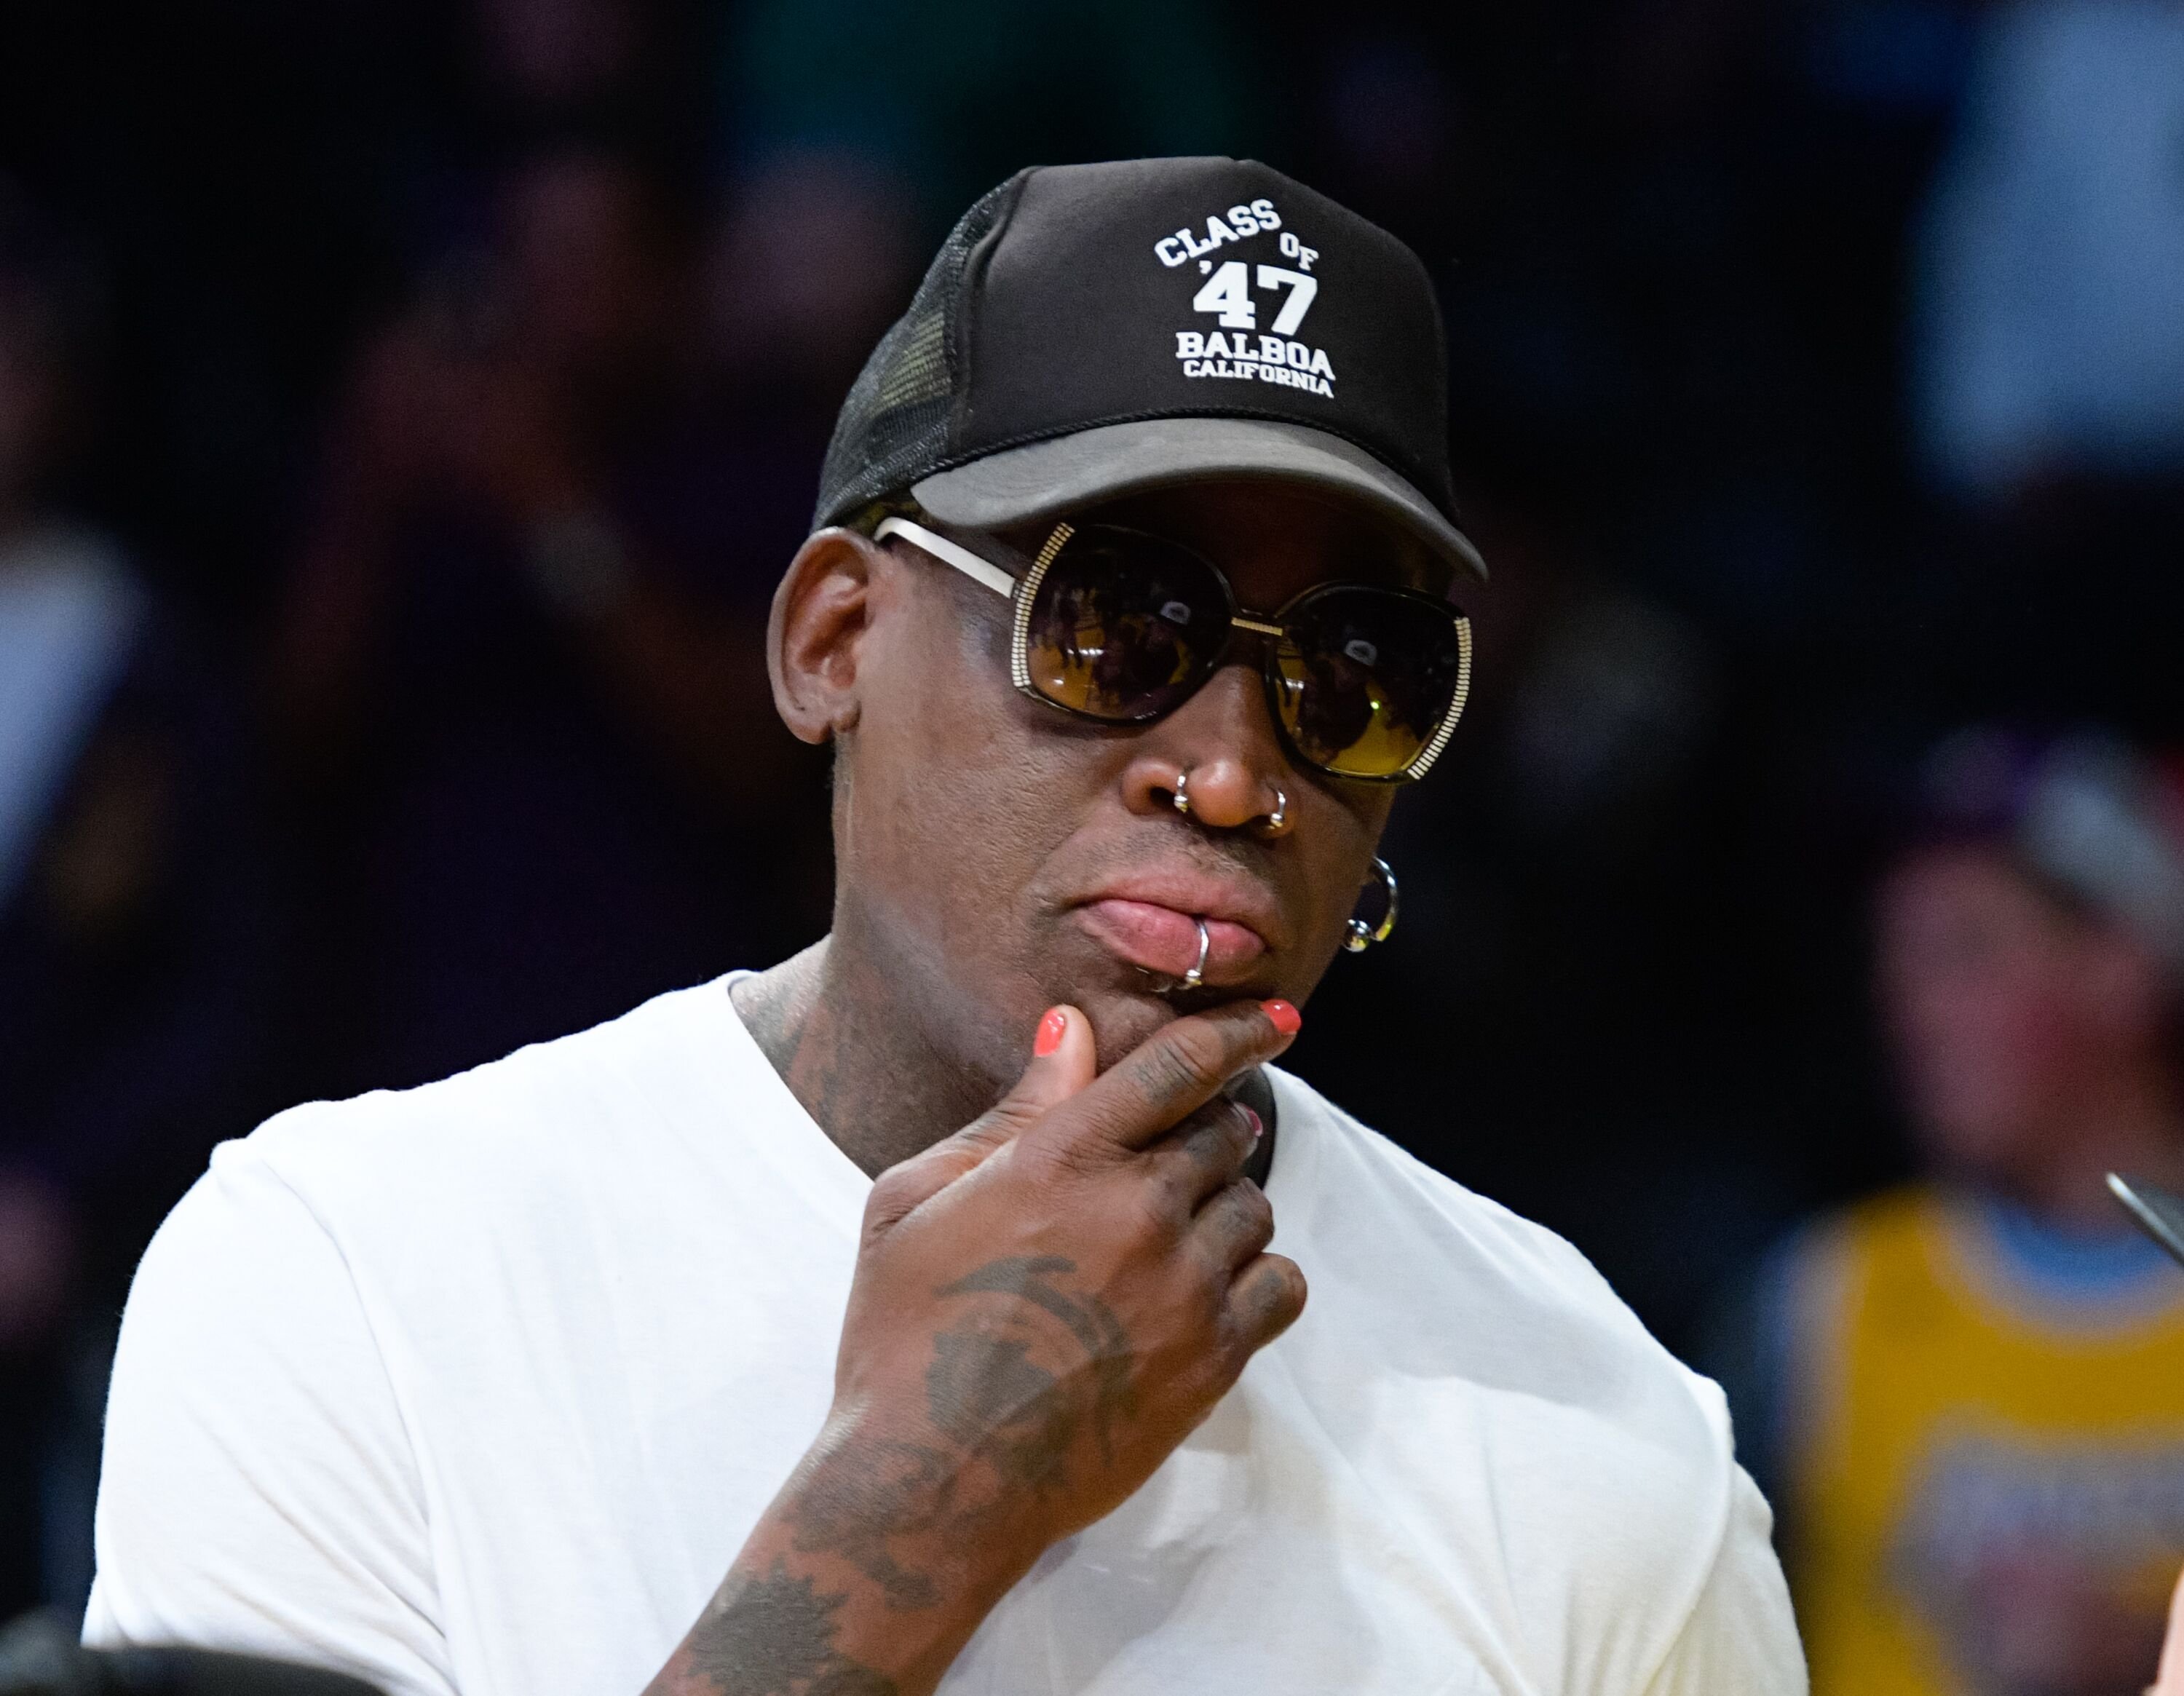 Dennis Rodman attends a basketball game between the Golden State Warriors and the Los Angeles Lakers at Staples Center on November 25, 2016. | Photo: Getty Images